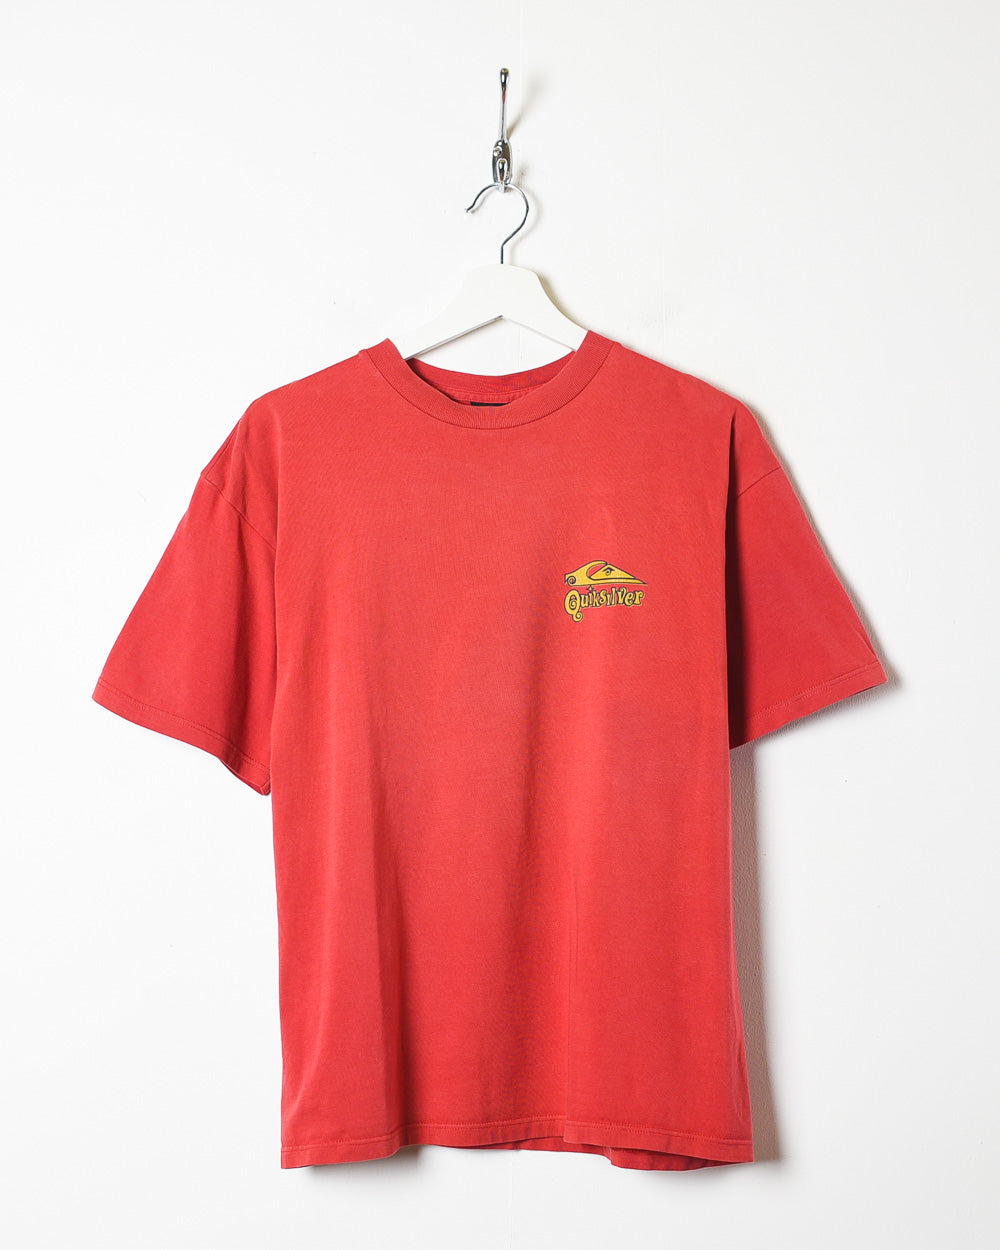 Red Quiksilver T-Shirt - Small